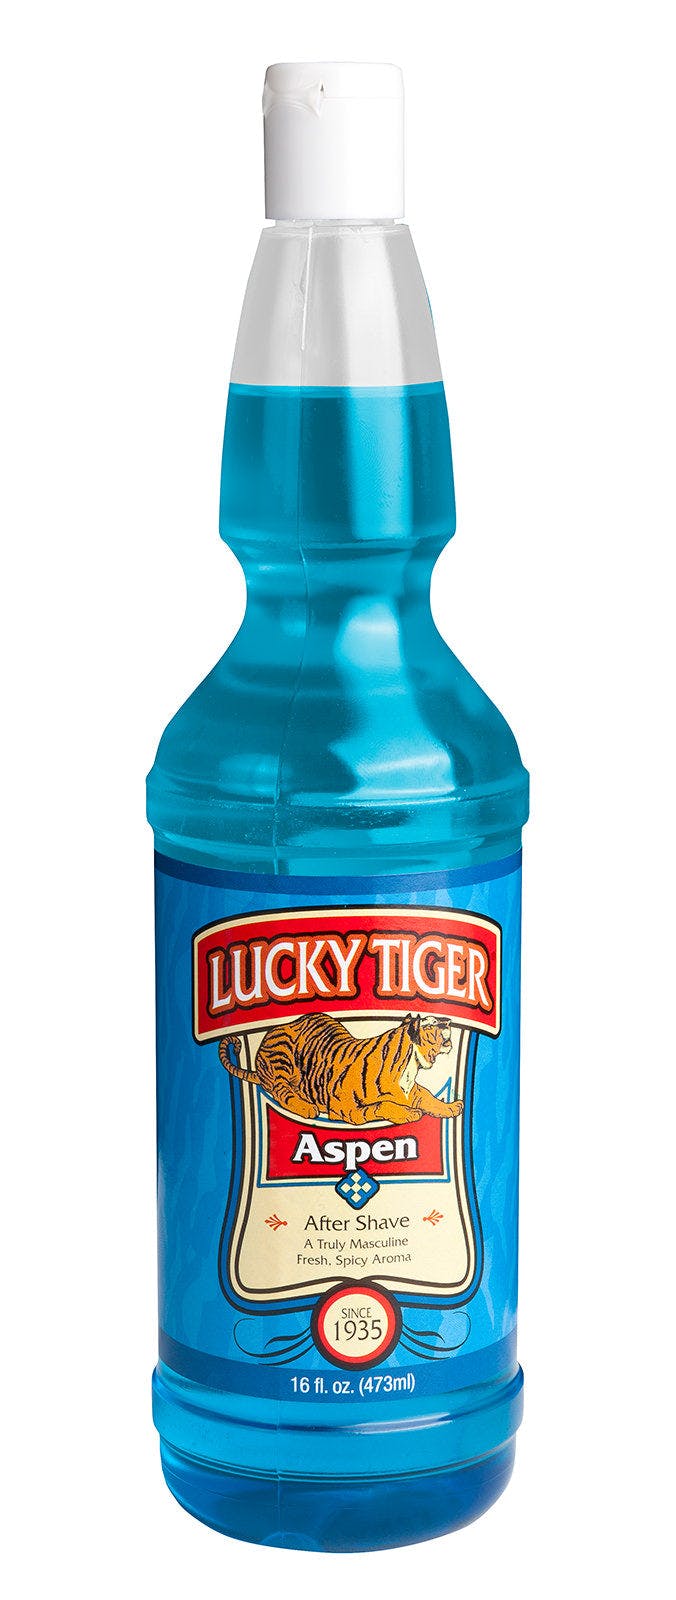 Lucky Tiger Aspen After Shave 473ml